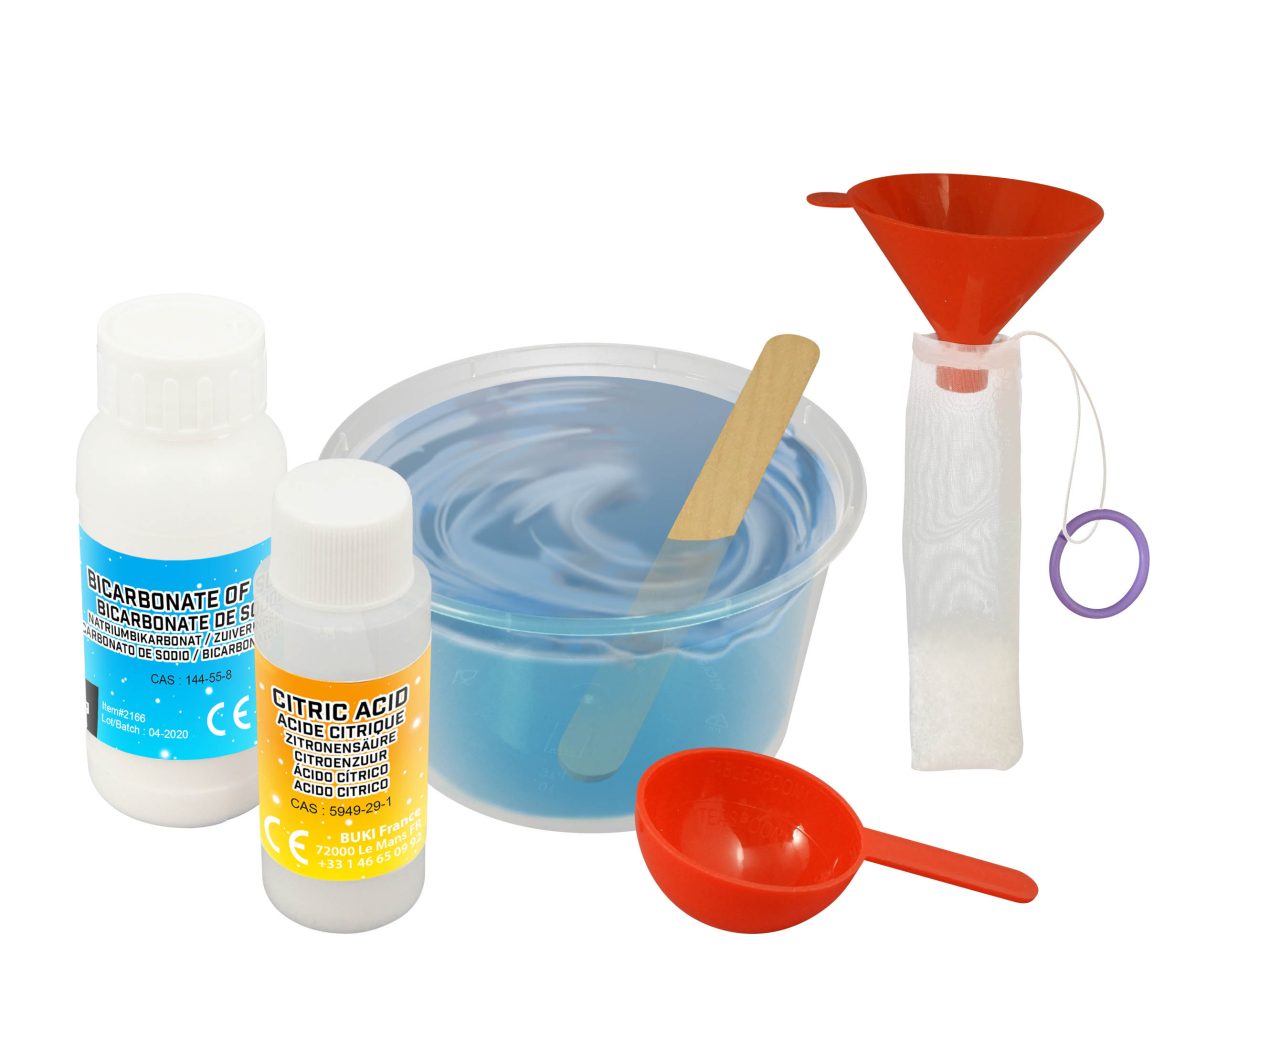 Buki Toys - Rocket Science product. Chemicals and liquids for rocket science.